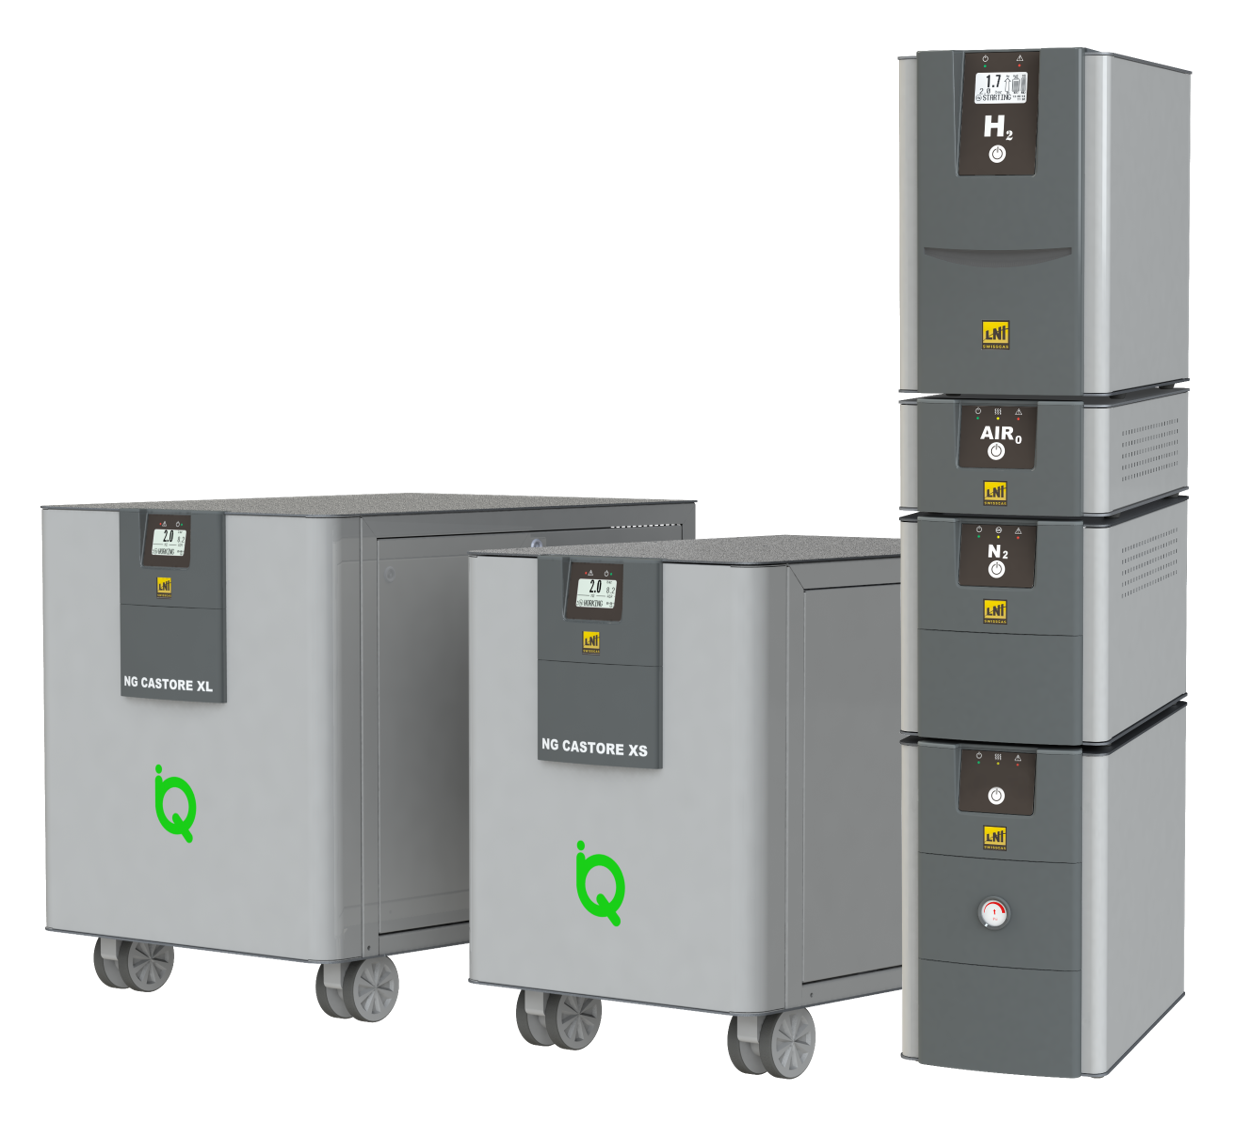 Gas generators and calibration systems